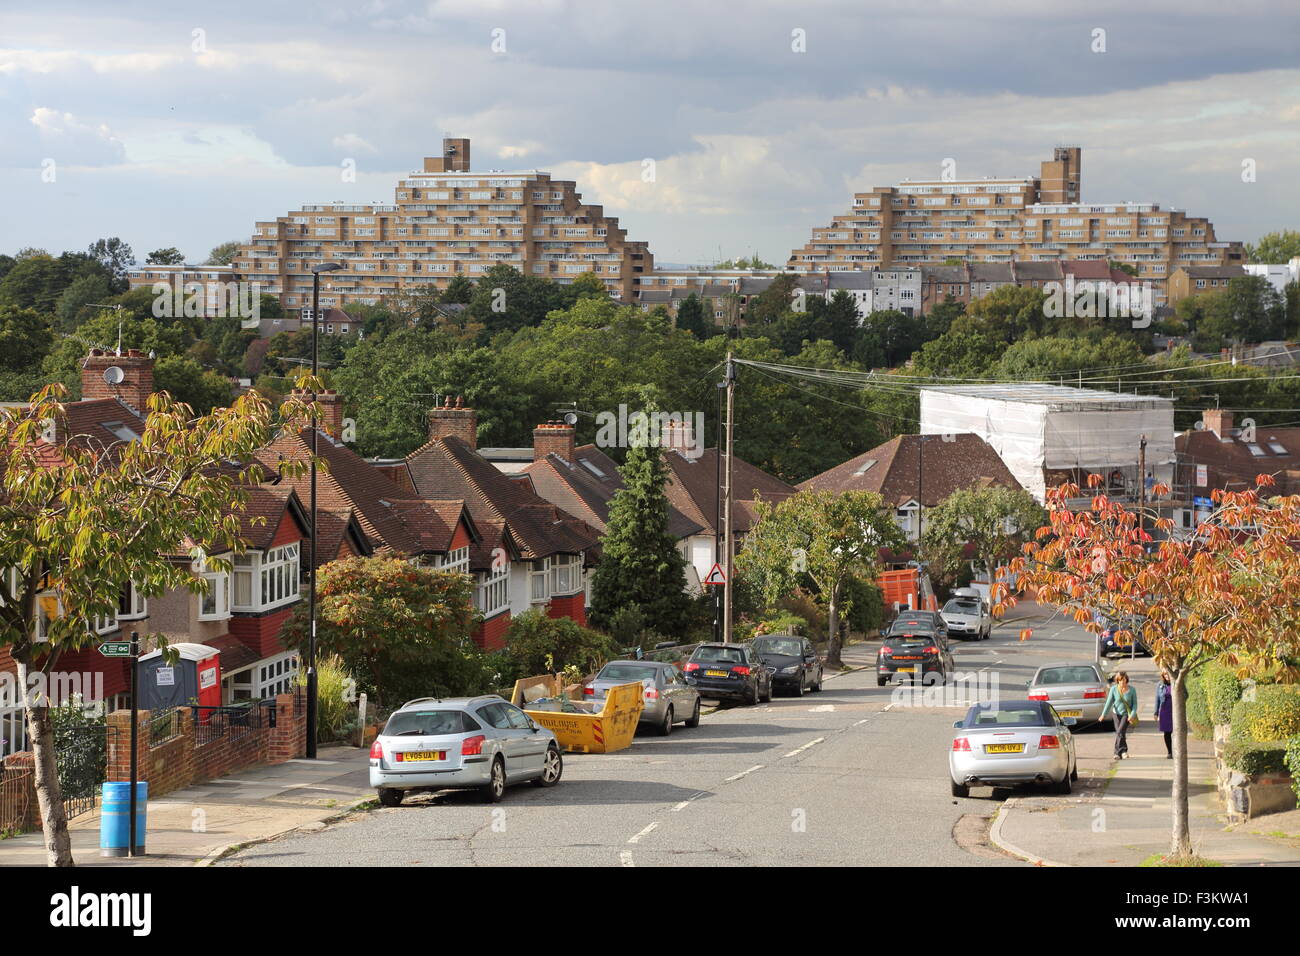 Suburban street in South East London showing the famous brutalist Dawson Heights 1960's housing scheme in the background Stock Photo